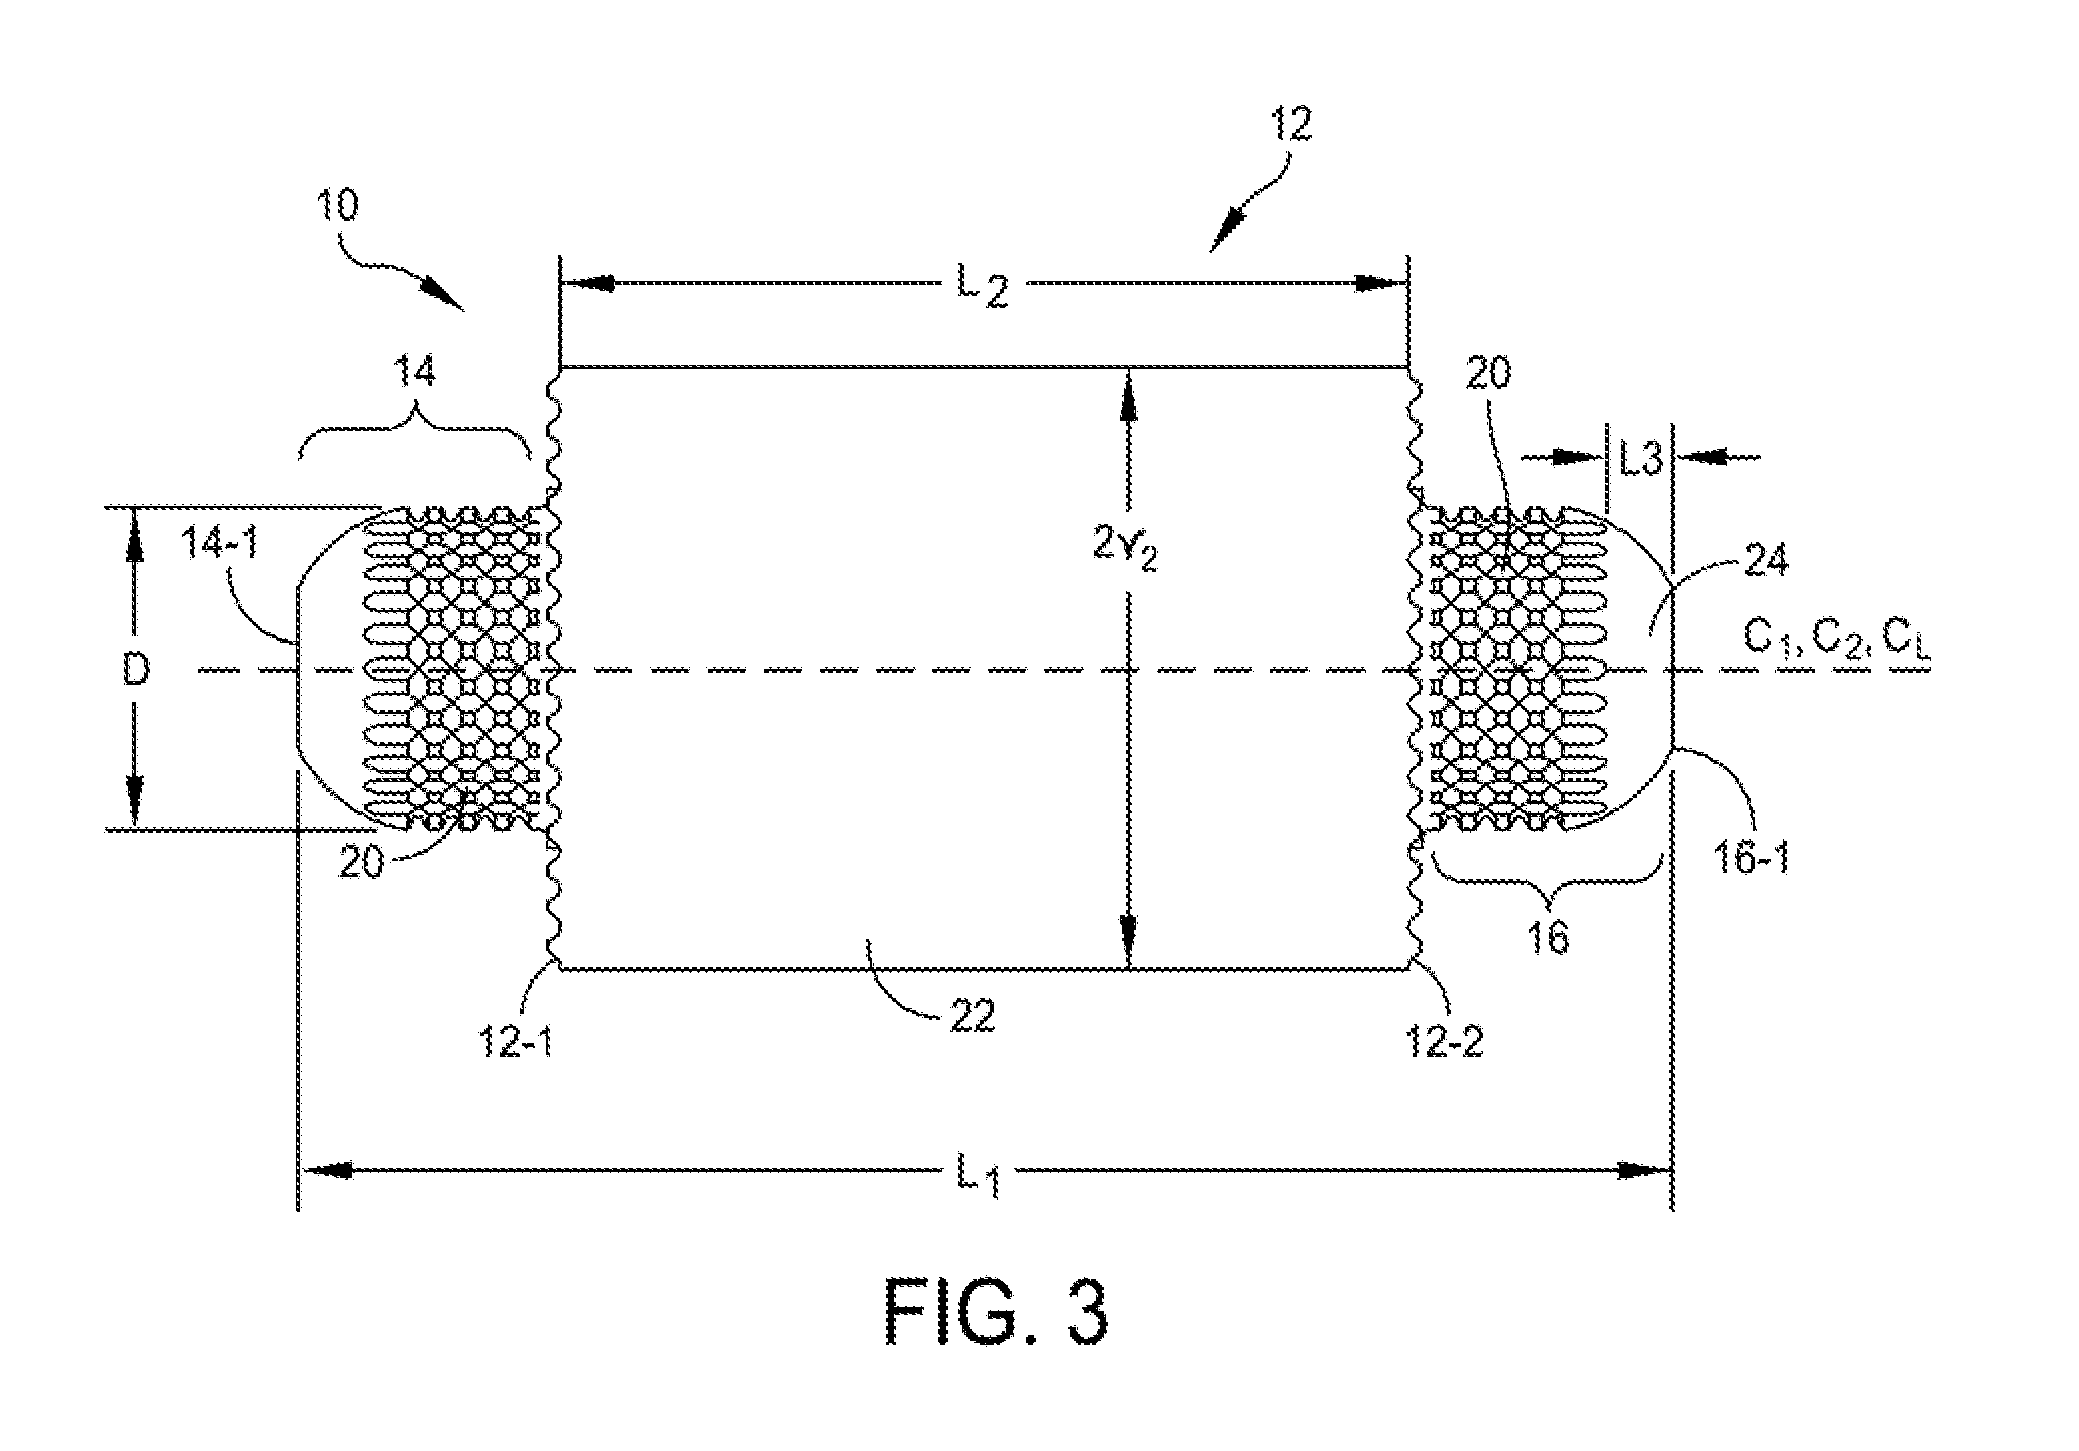 Joint implant, method of making and surgical procedure for implanting the same